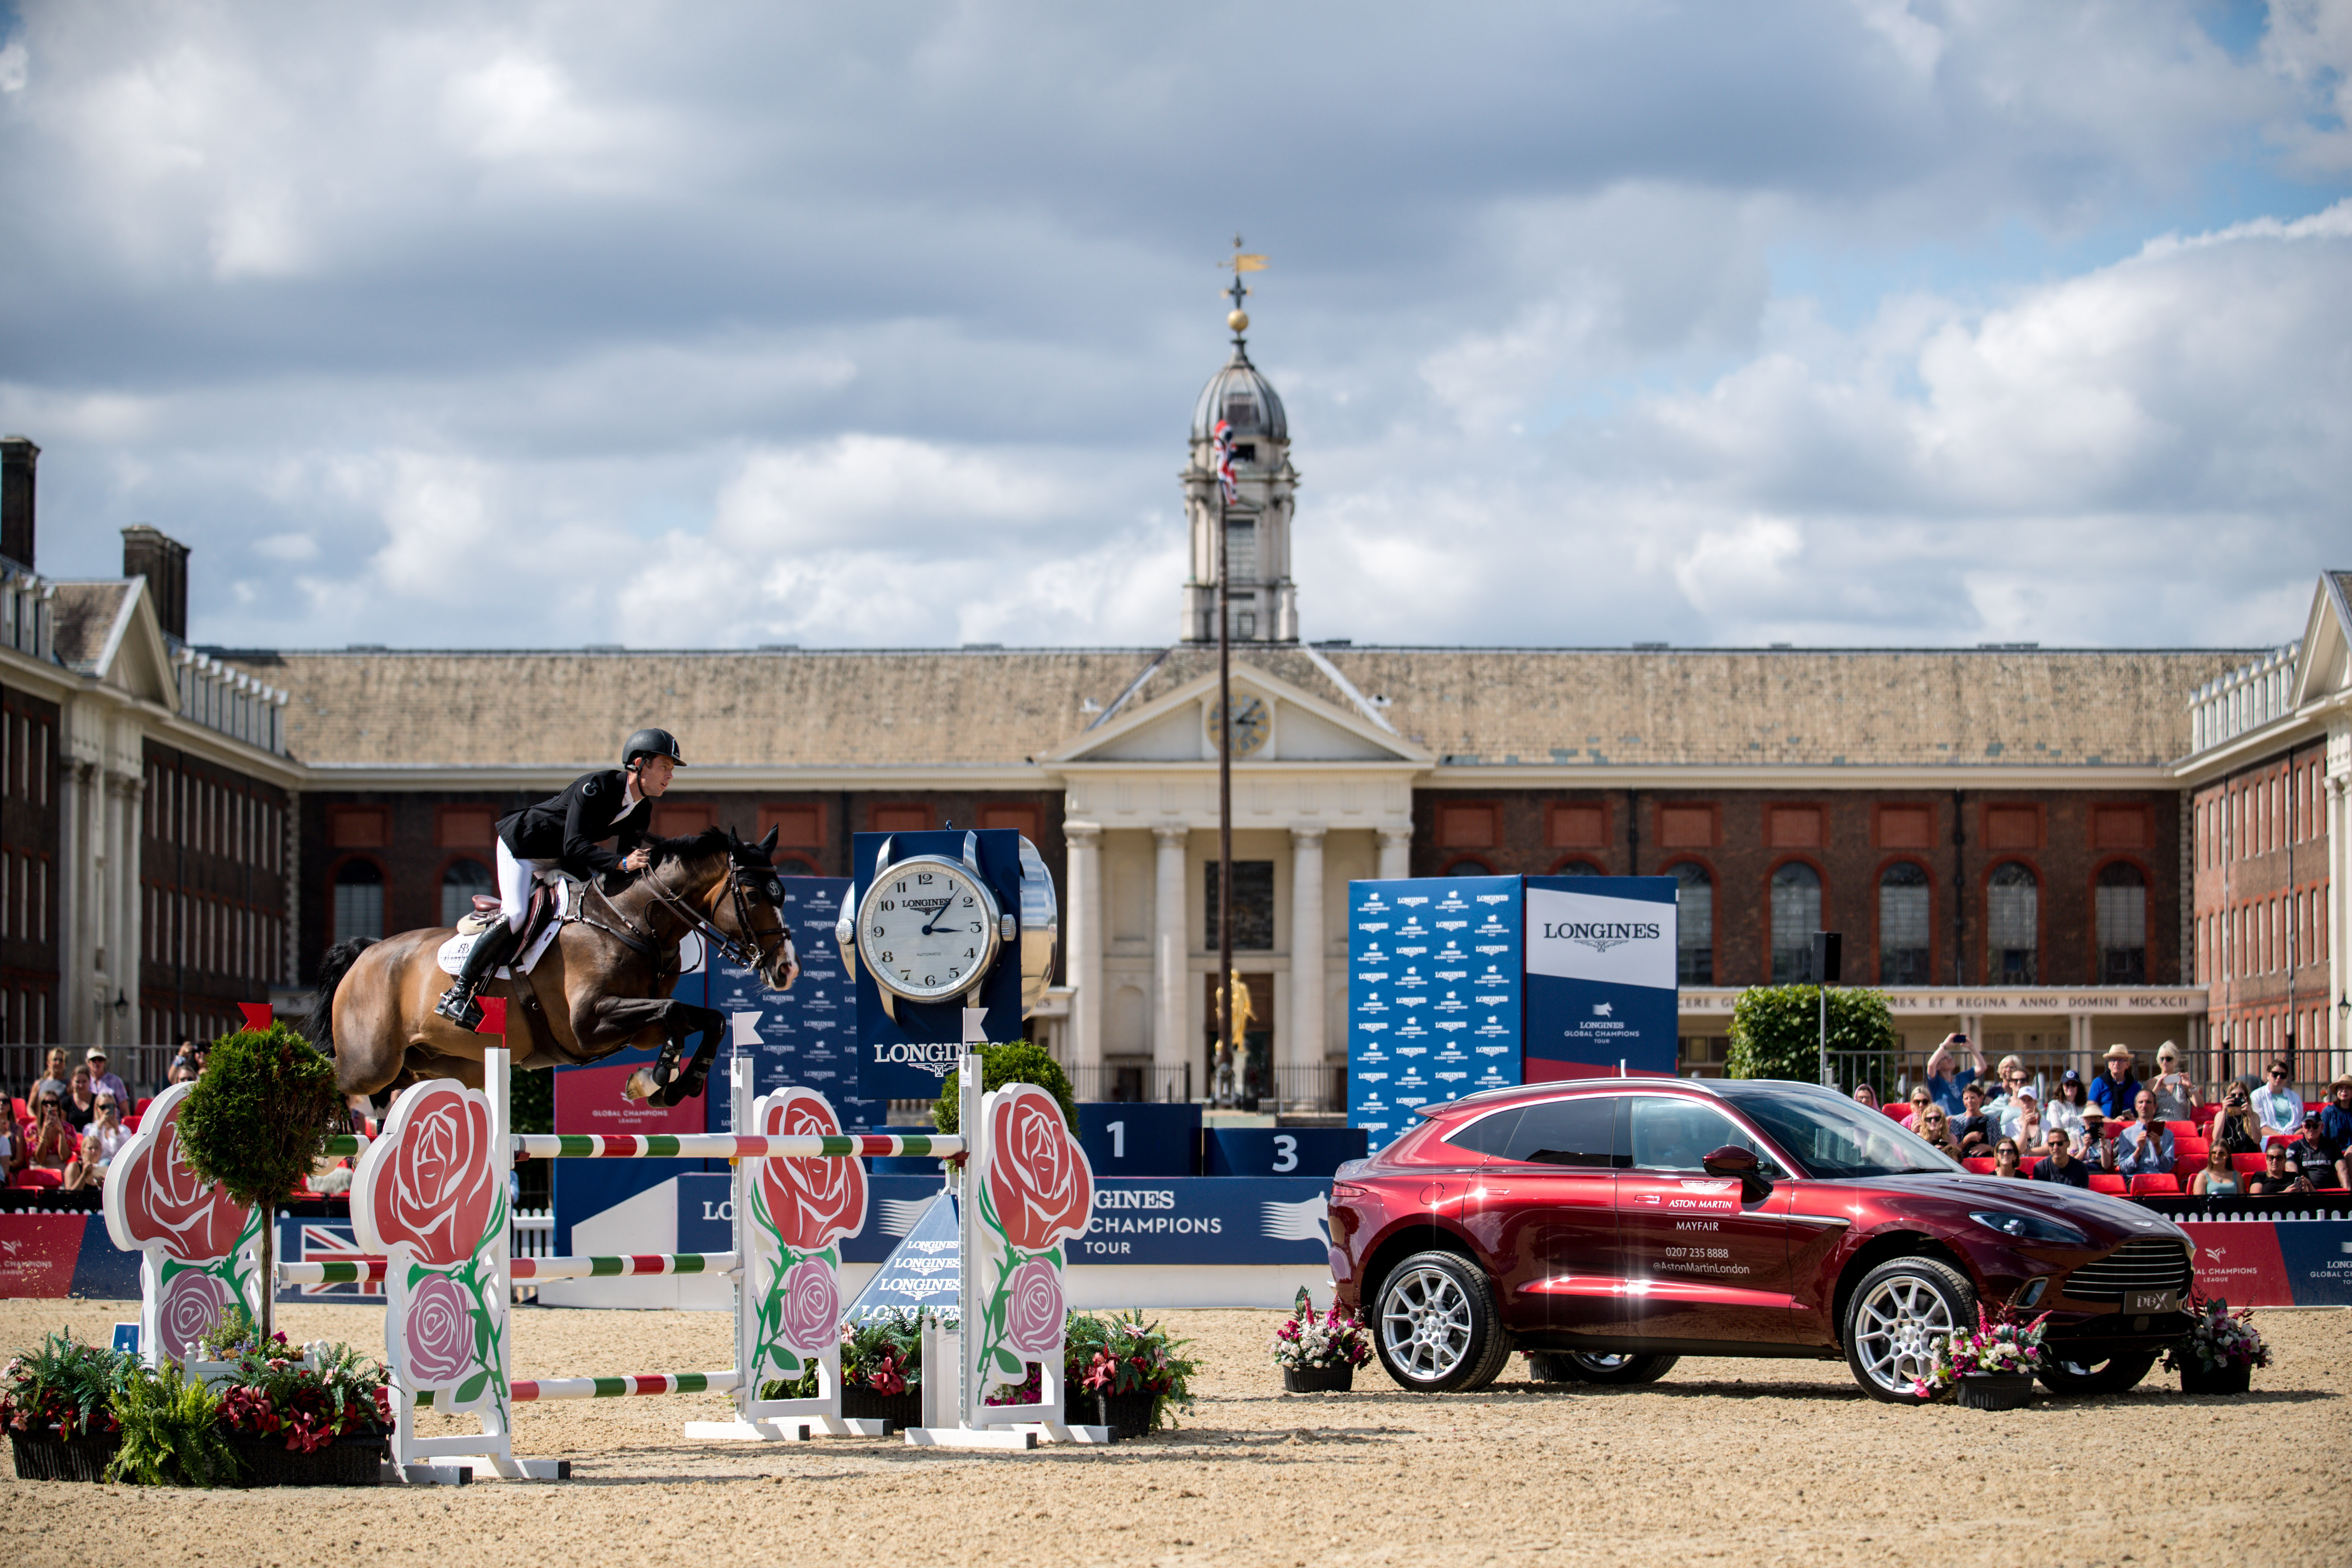 Get ready for the clash between Scott Brash and Ben Maher ...